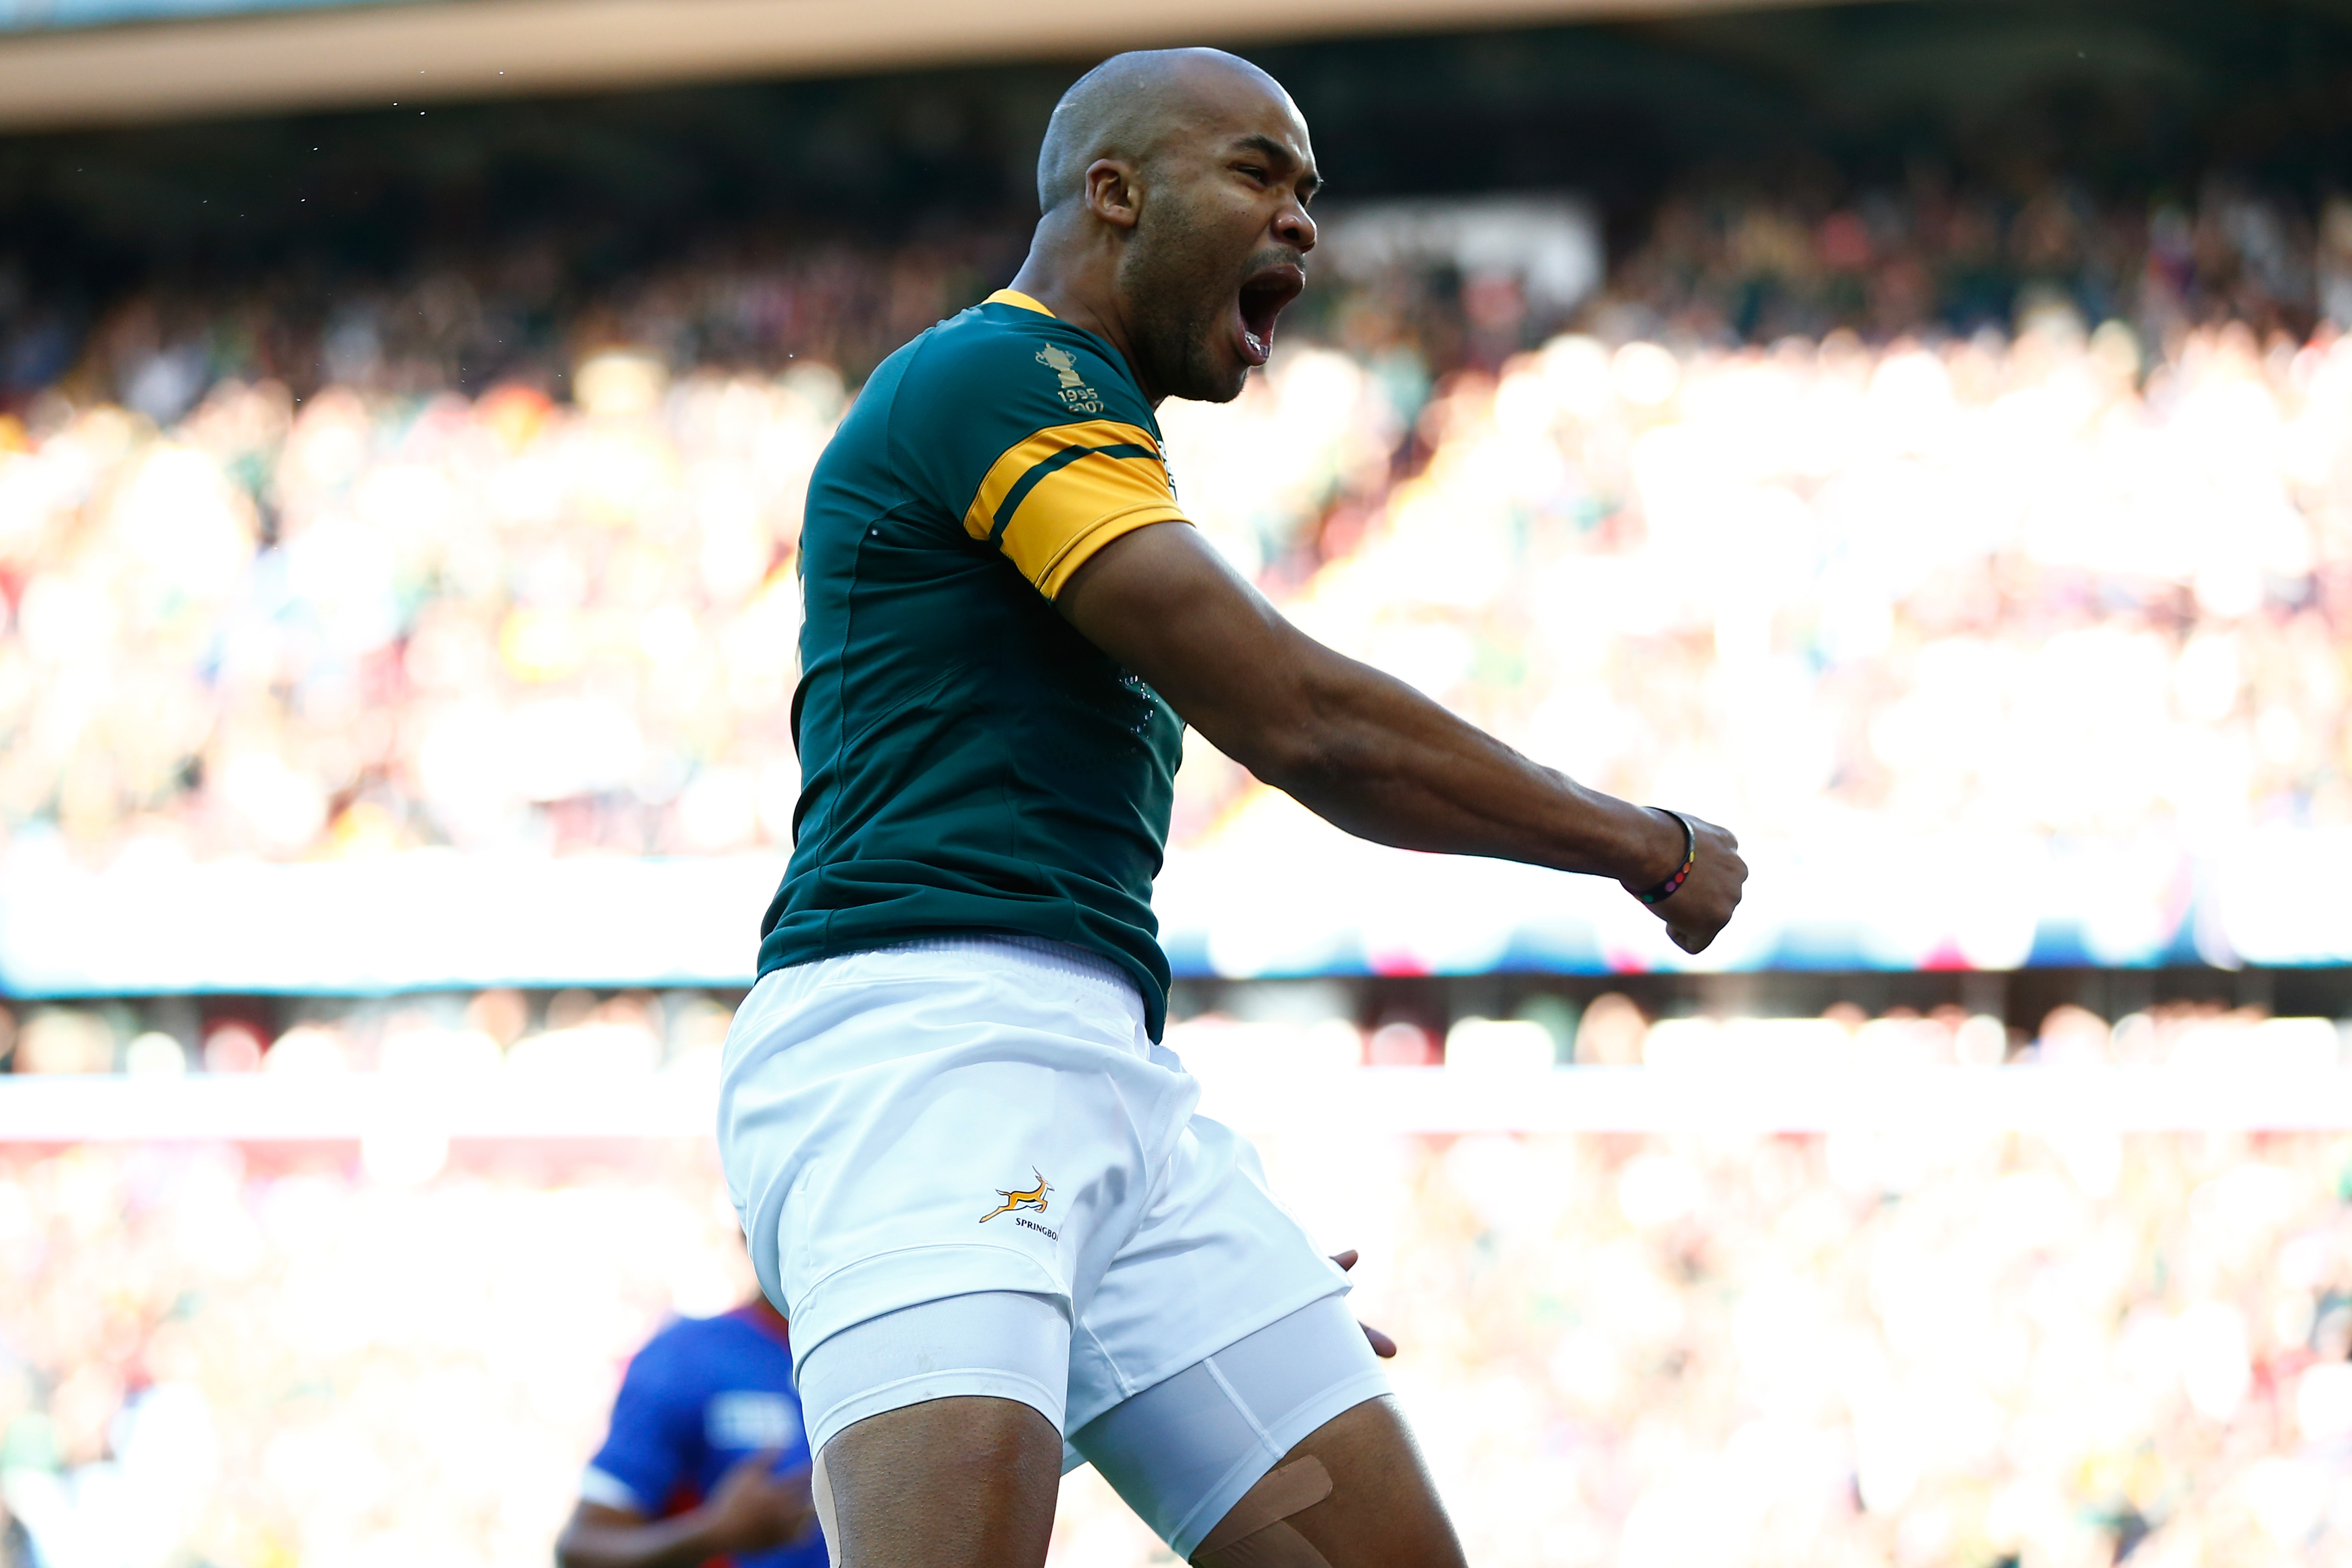 BIRMINGHAM, ENGLAND - SEPTEMBER 26: JP Pietersen of South Africa celebrates scoring the opening try during the 2015 Rugby World Cup Pool B match between South Africa and Samoa at Villa Park on September 26, 2015 in Birmingham, United Kingdom. (Photo by Laurence Griffiths/Getty Images)